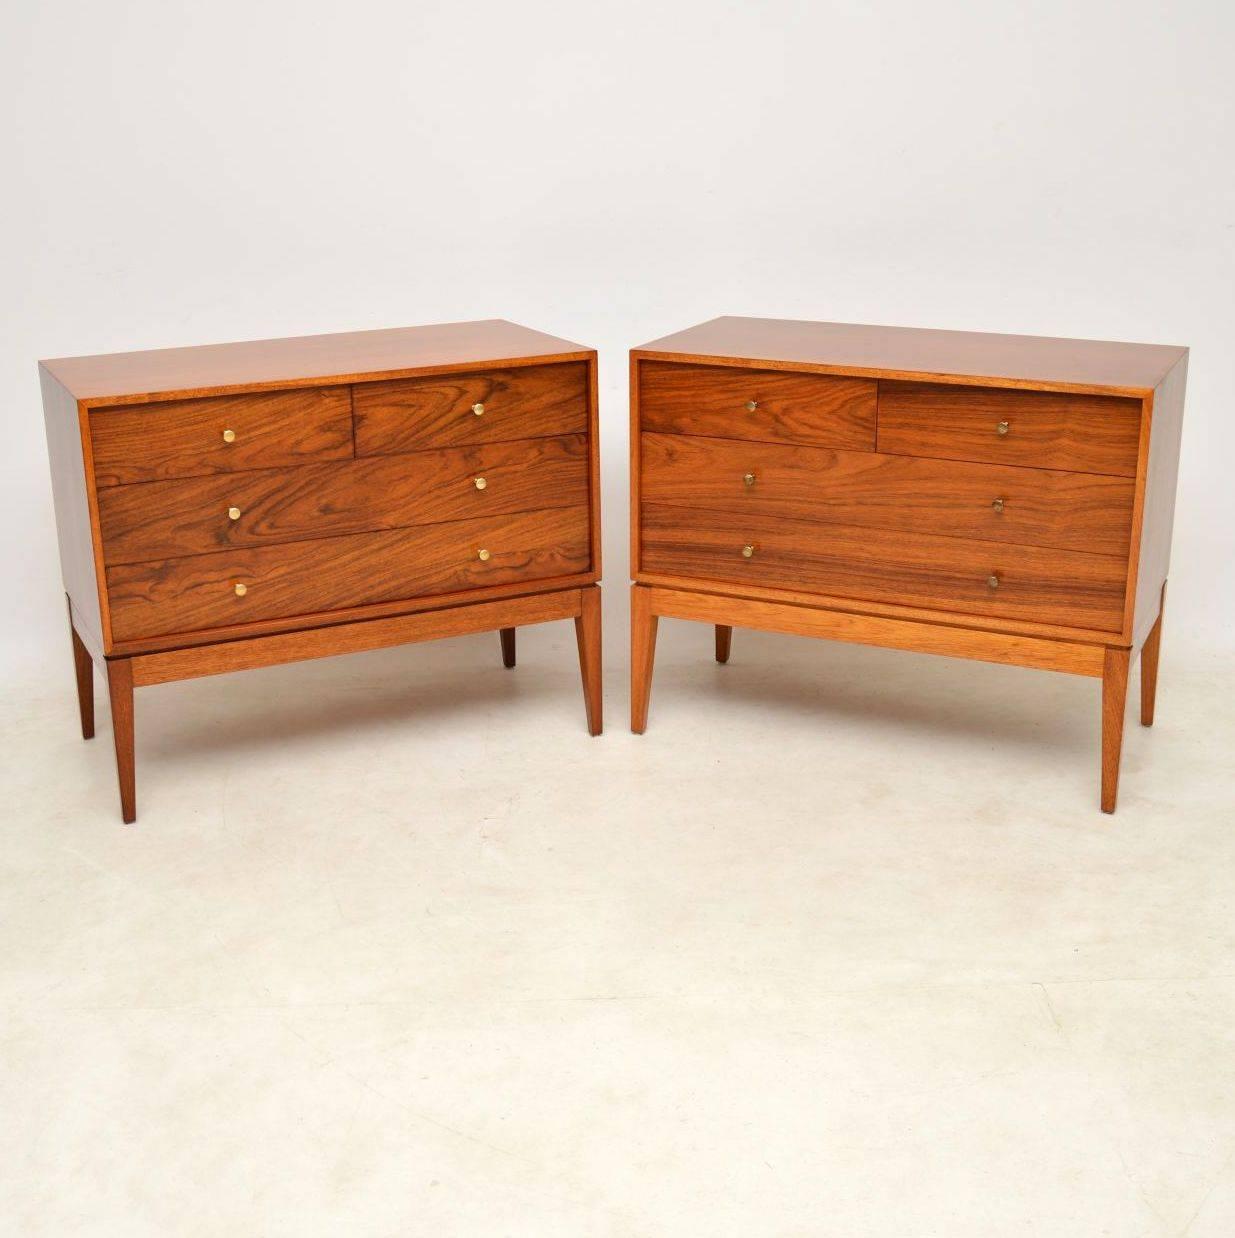 A stunning pair of vintage chests of drawers, these were made by Uniflex in the 1950s-1960s. They have wooden drawer fronts with brass handles, and mahogany carcasses. We have had these stripped and re-polished to a very high standard, the condition